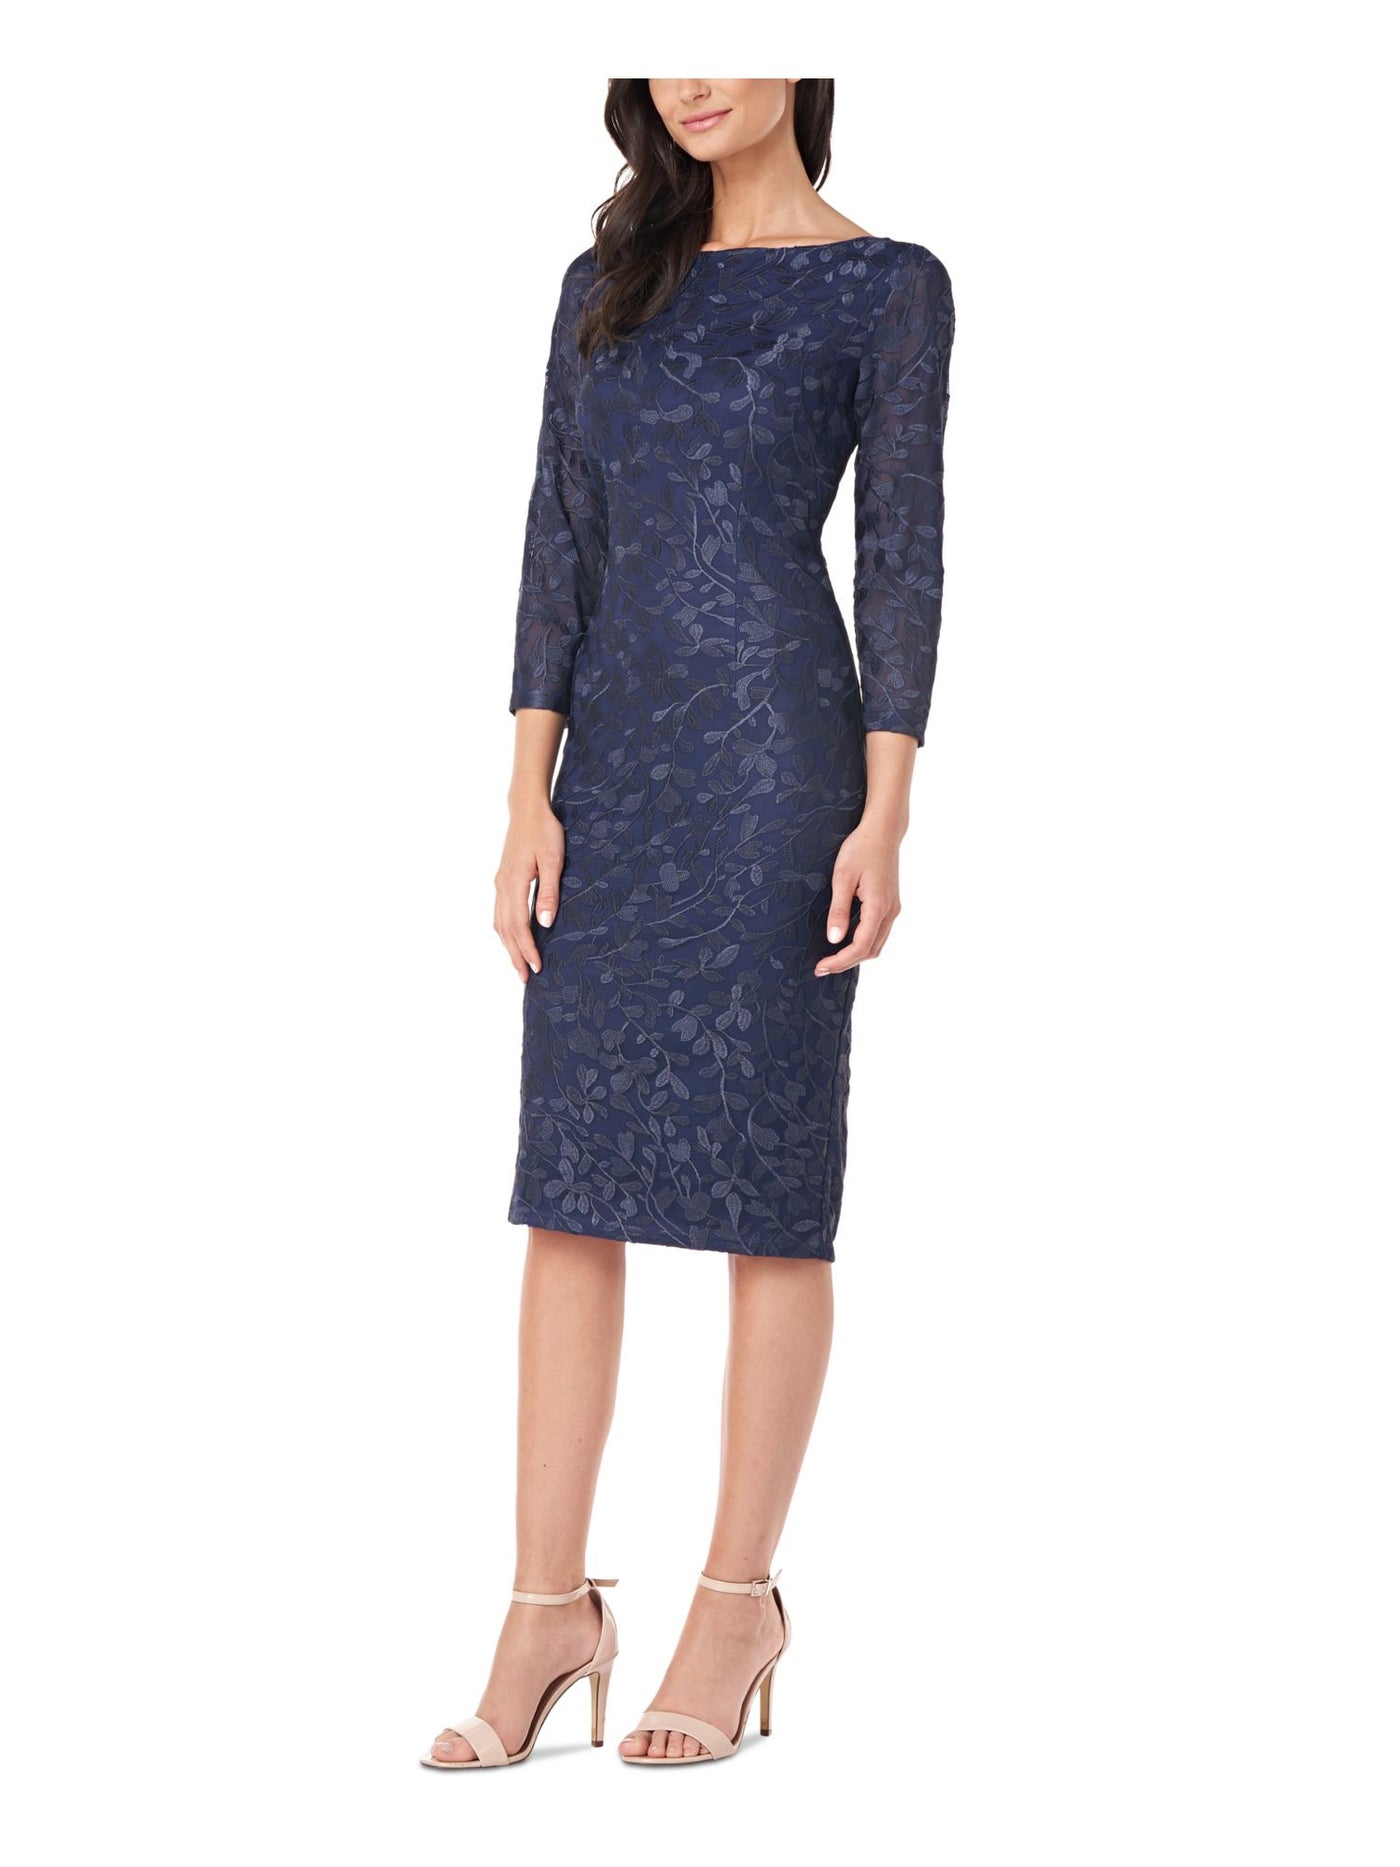 JS COLLECTION Womens Navy Embroidered Zippered 3/4 Sleeve Boat Neck Below The Knee Evening Sheath Dress 4